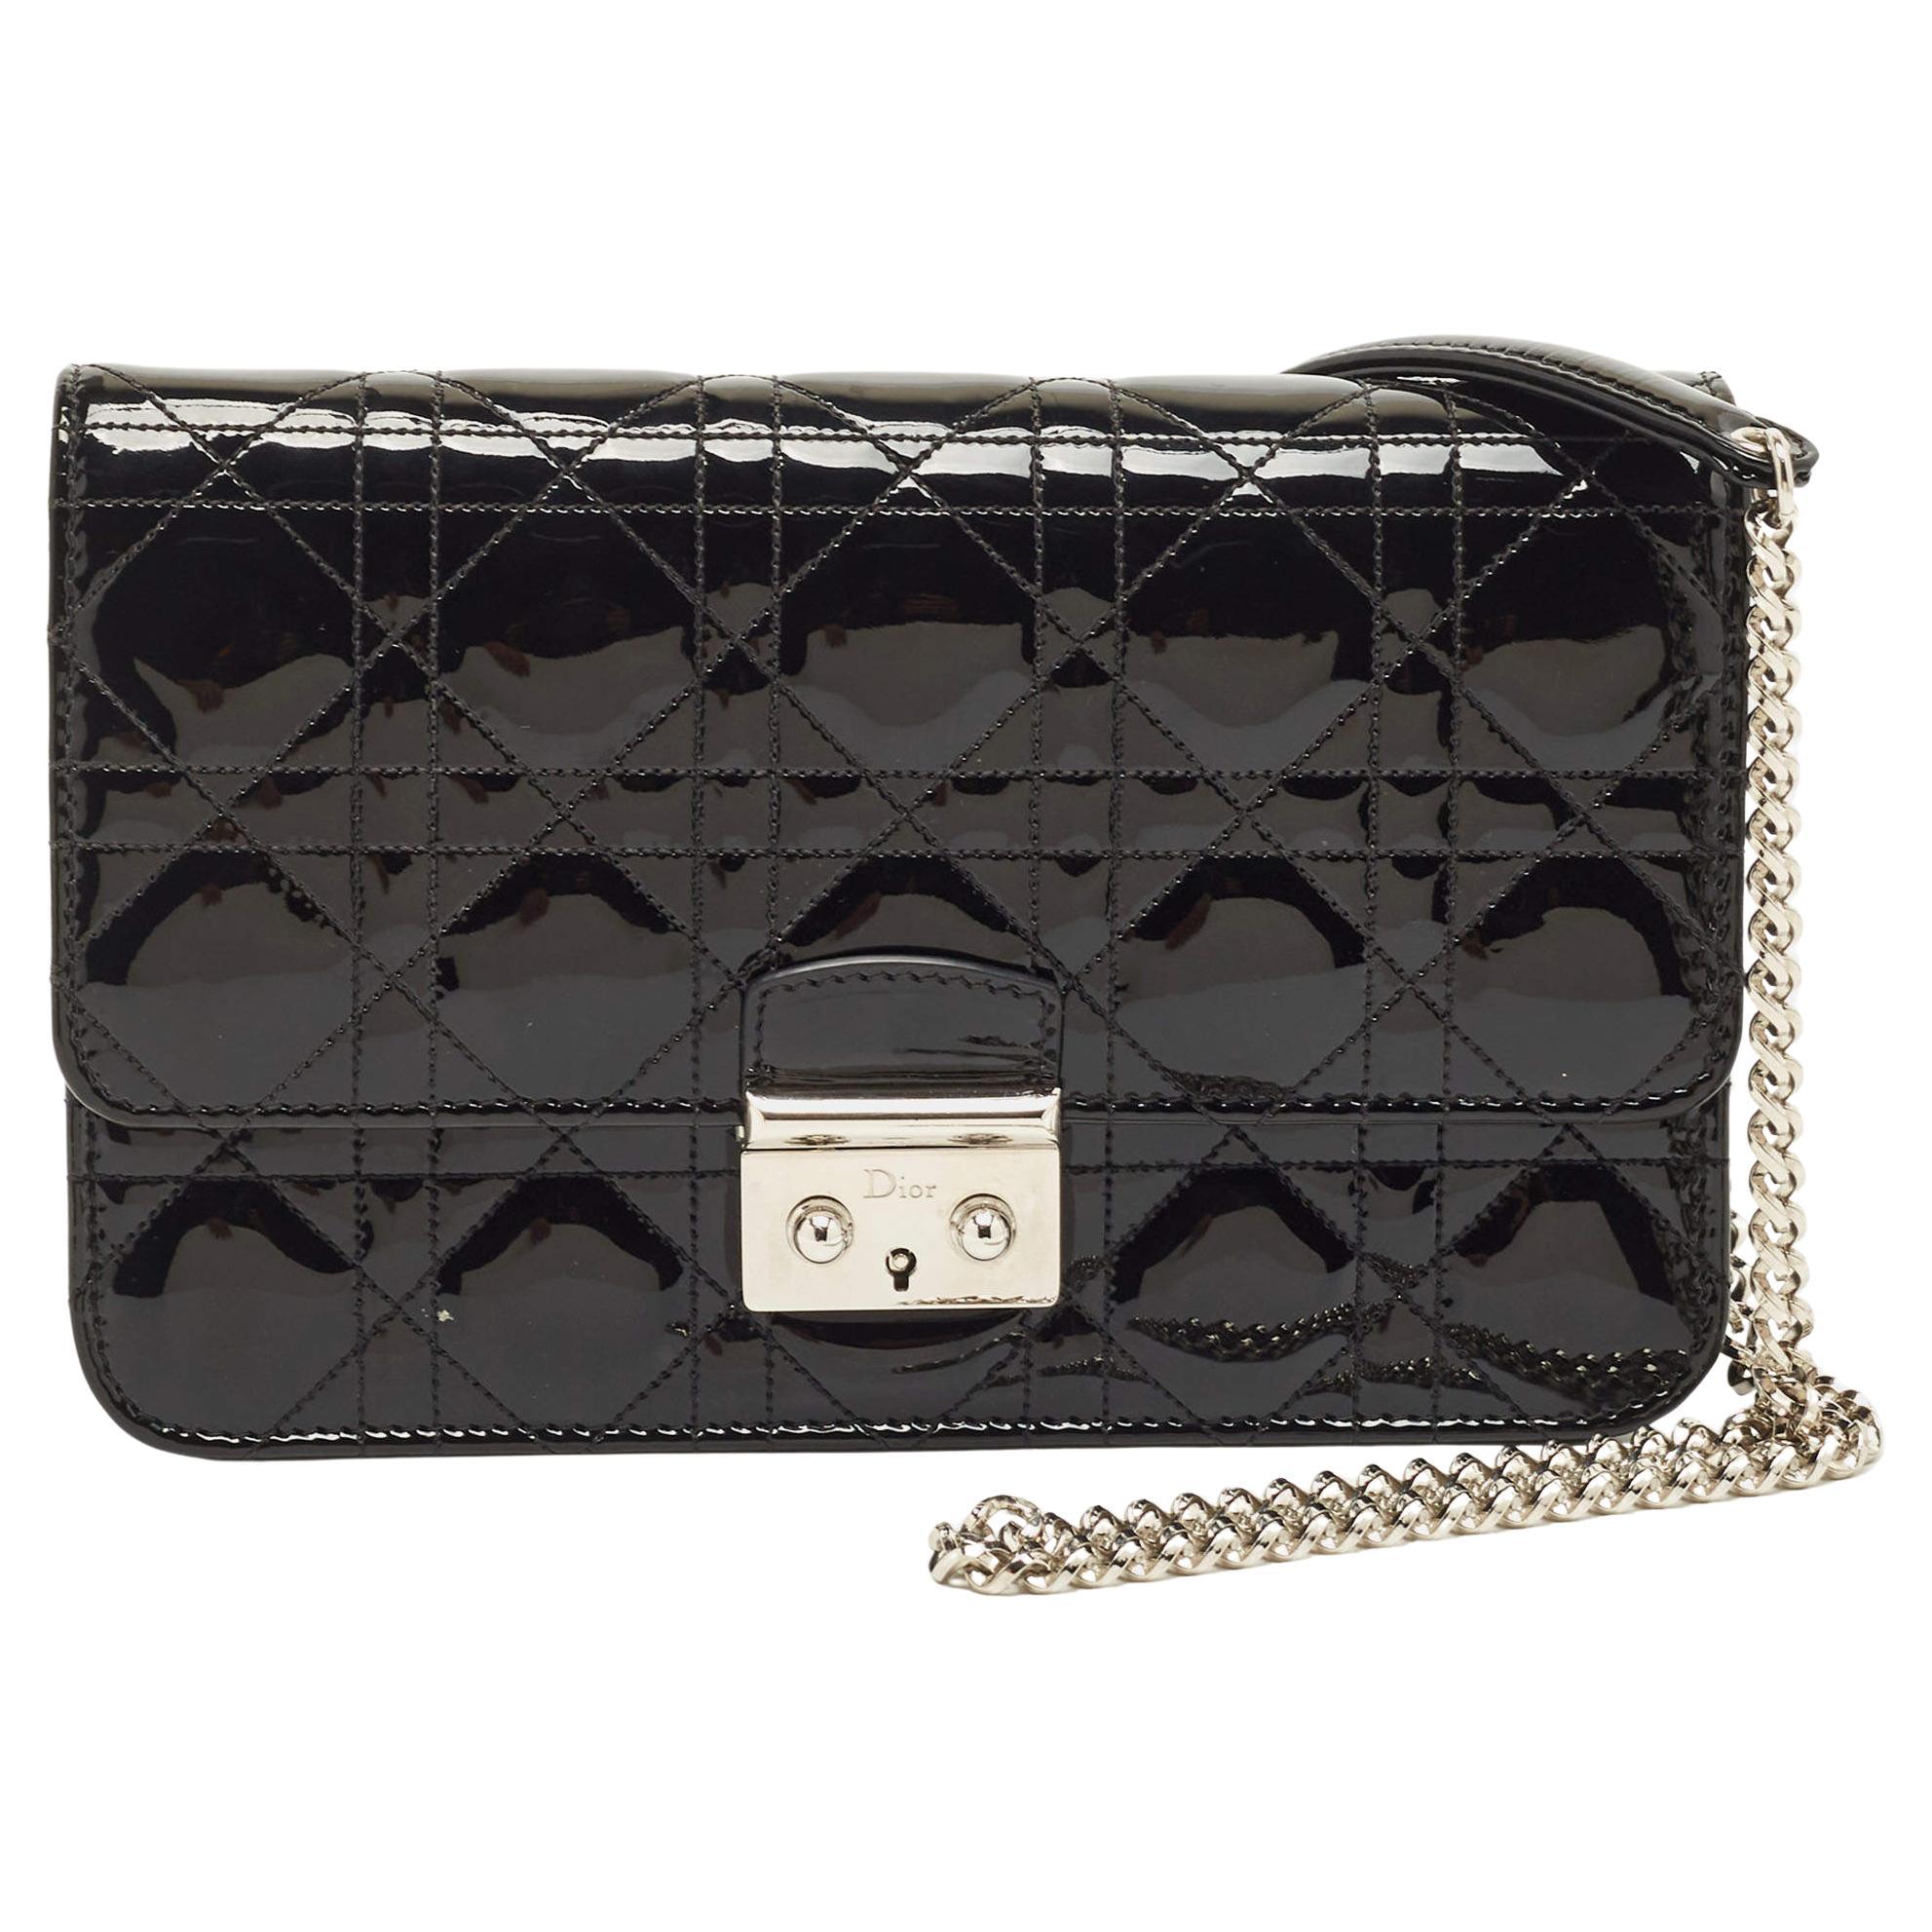 Dior Black Cannage Patent Leather Miss Dior Promenade Chain Bag